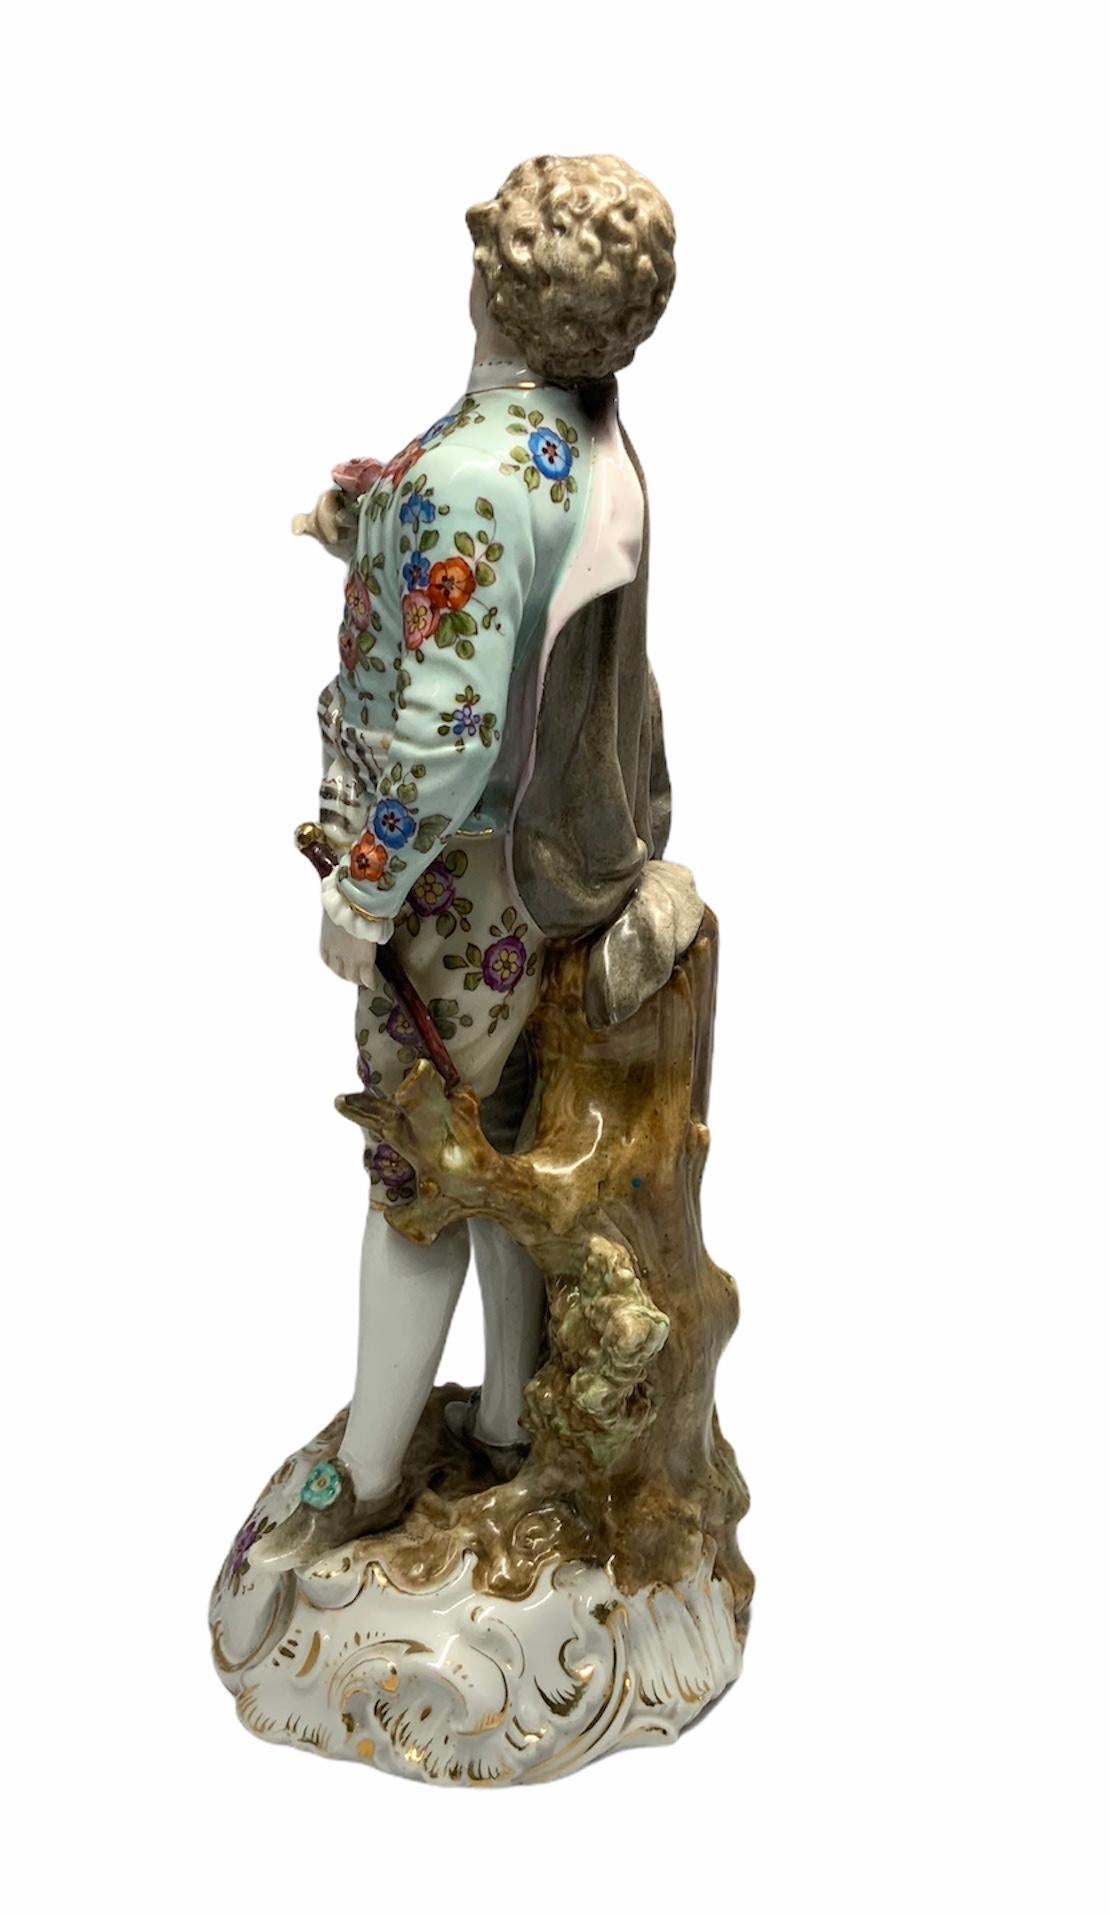 Hand-Painted Volksted -Richard Eckert Porcelain Figurine For Sale